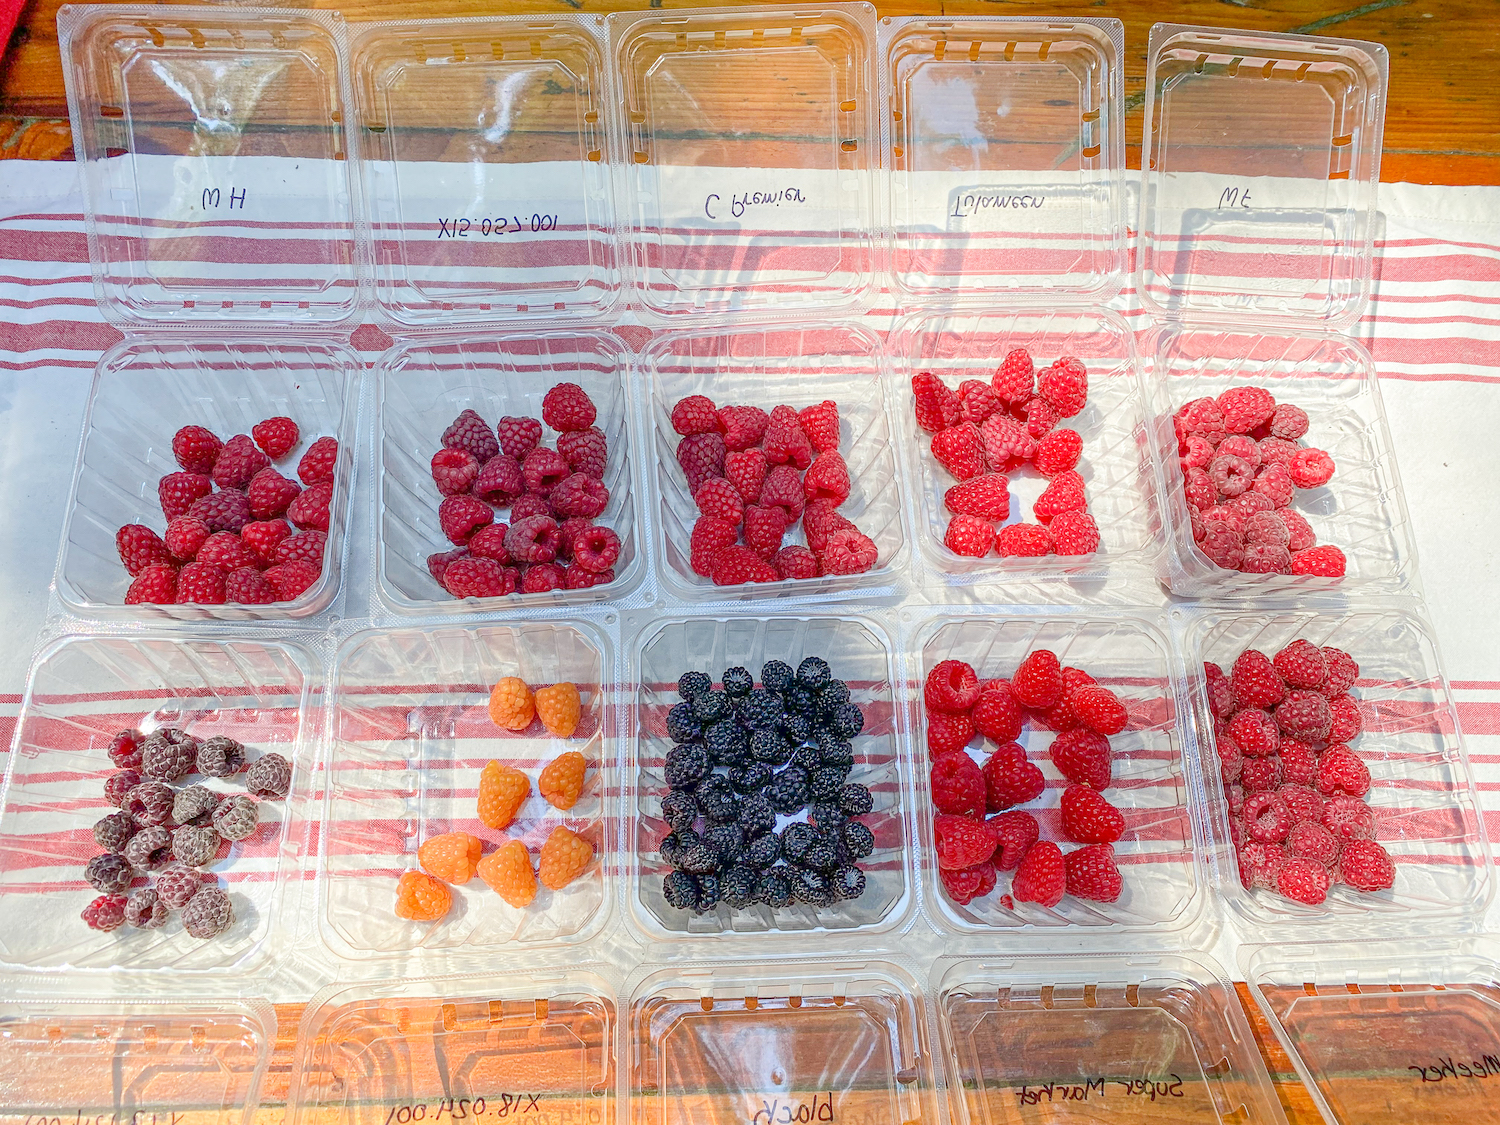 10 containers with different kinds of raspberries in each one